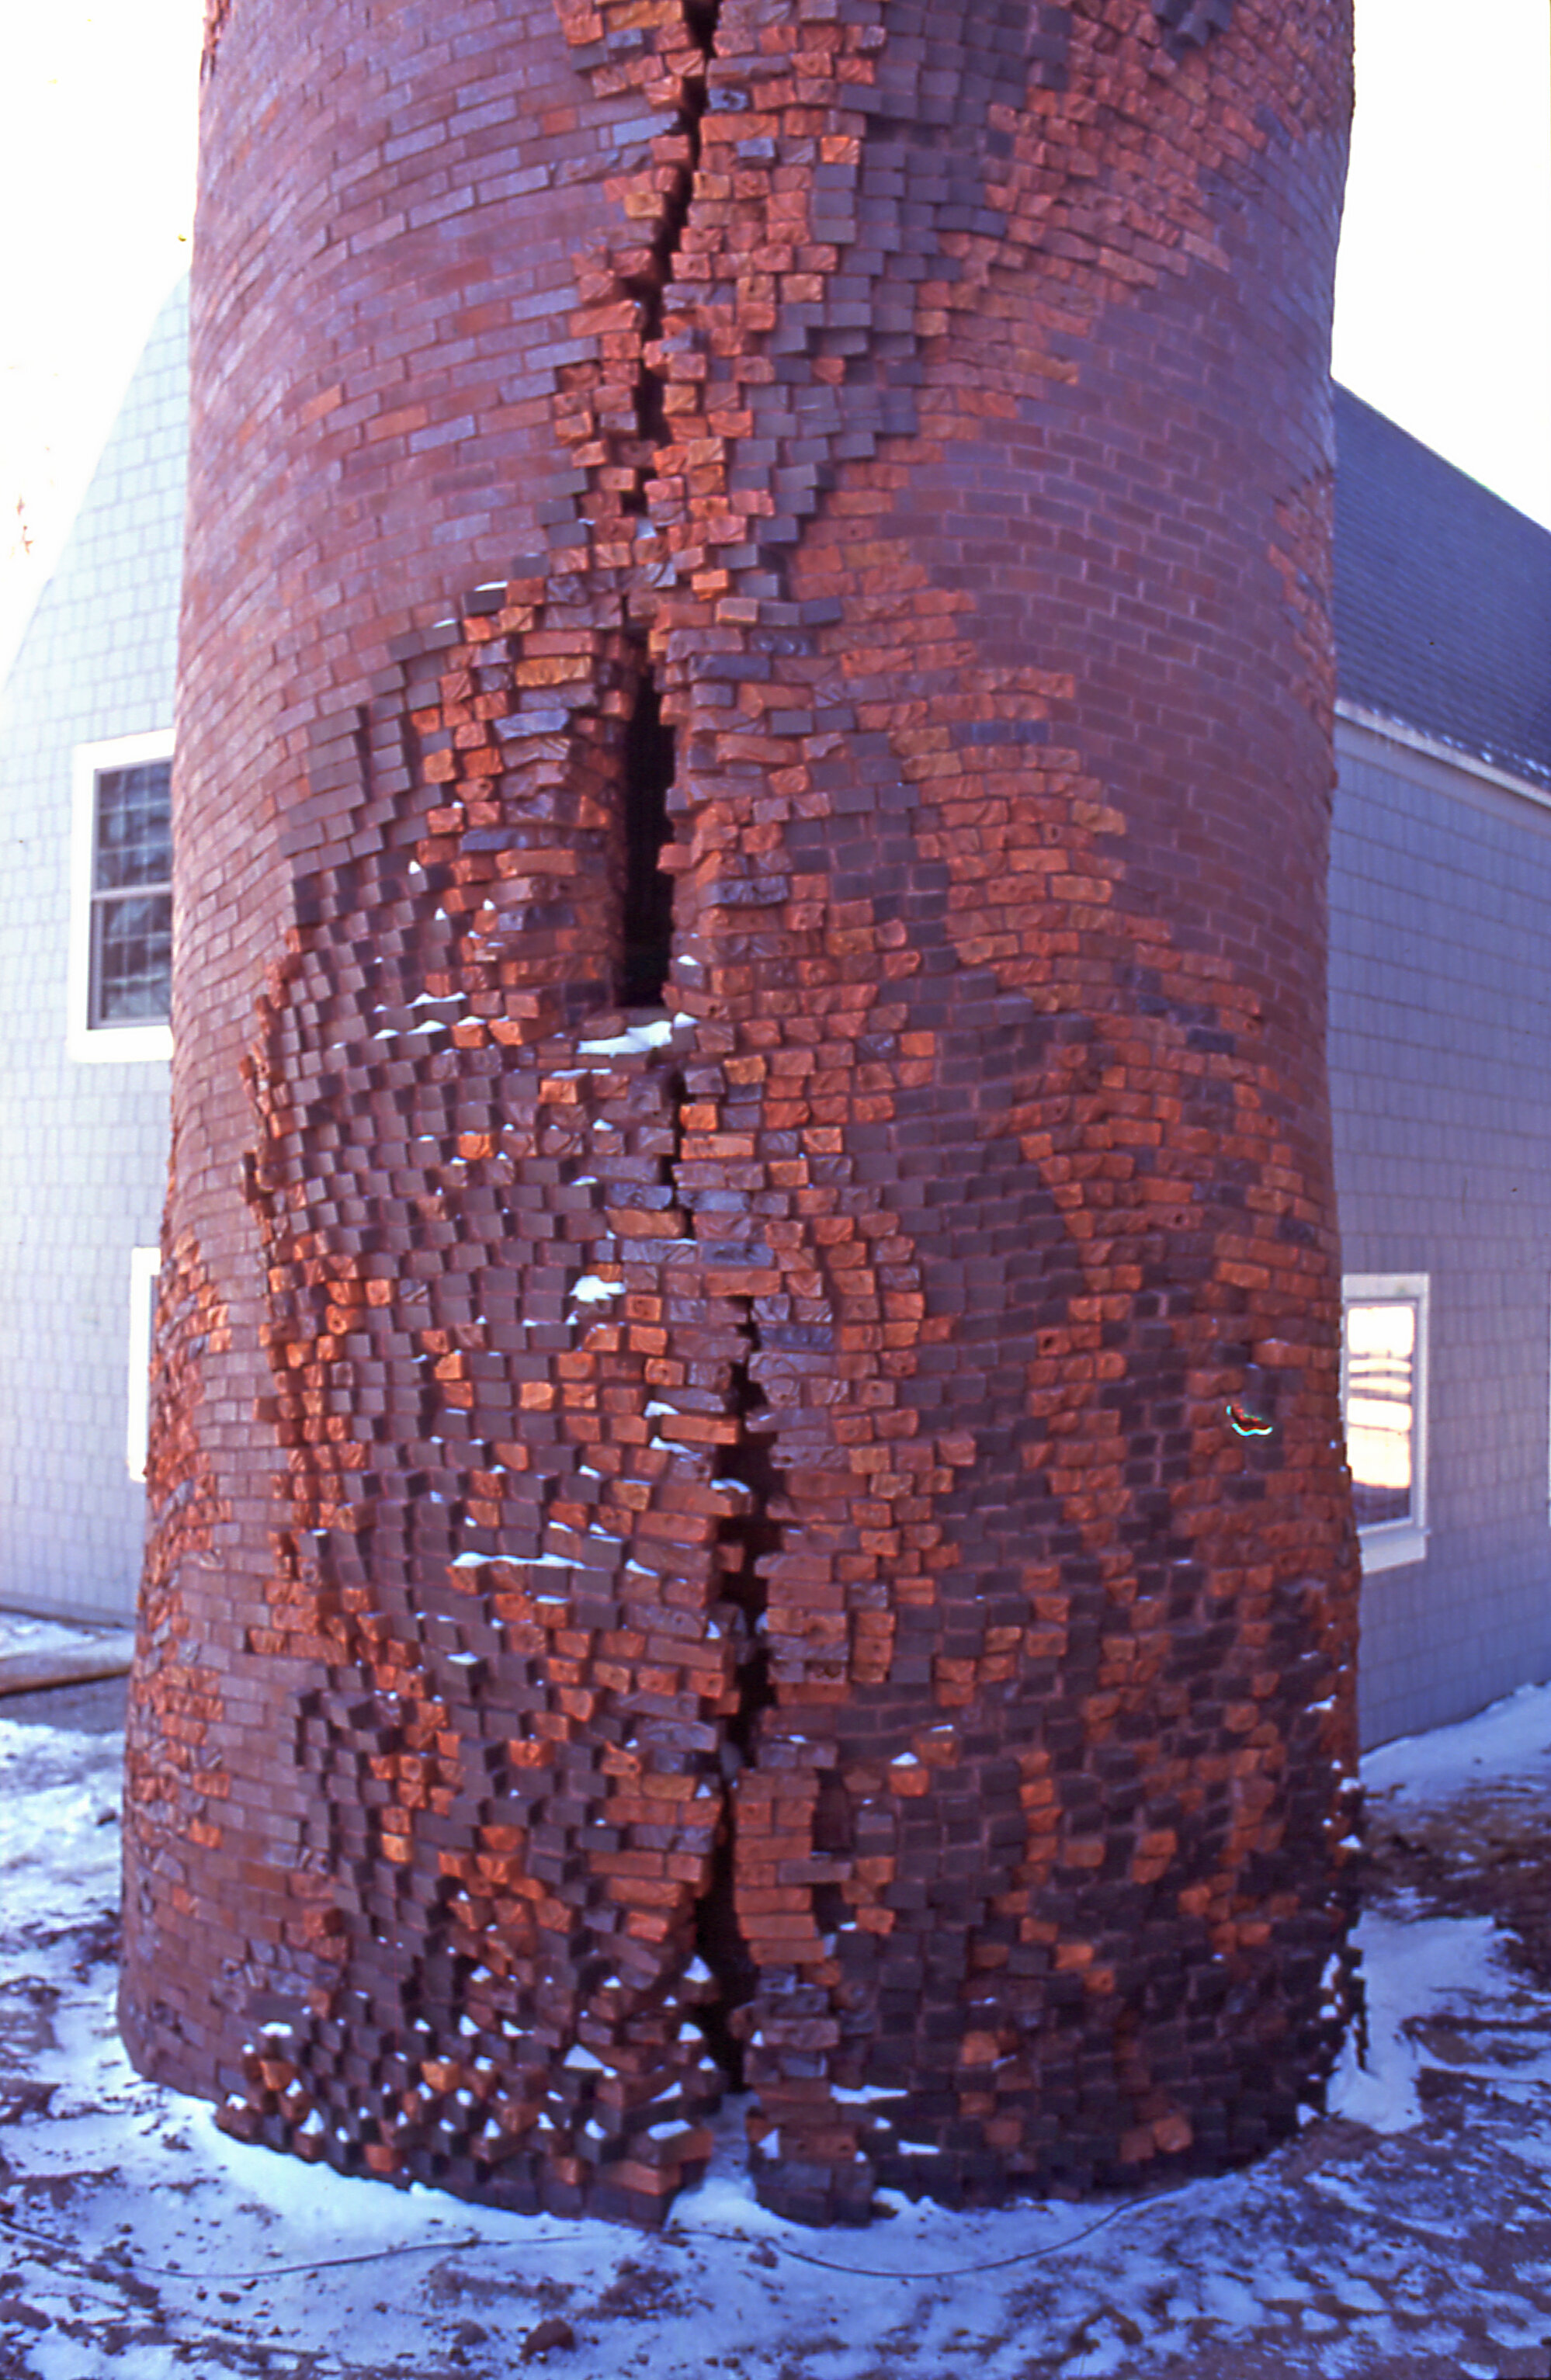 Craggy surface of silo designed by brick artist Michael Morgan